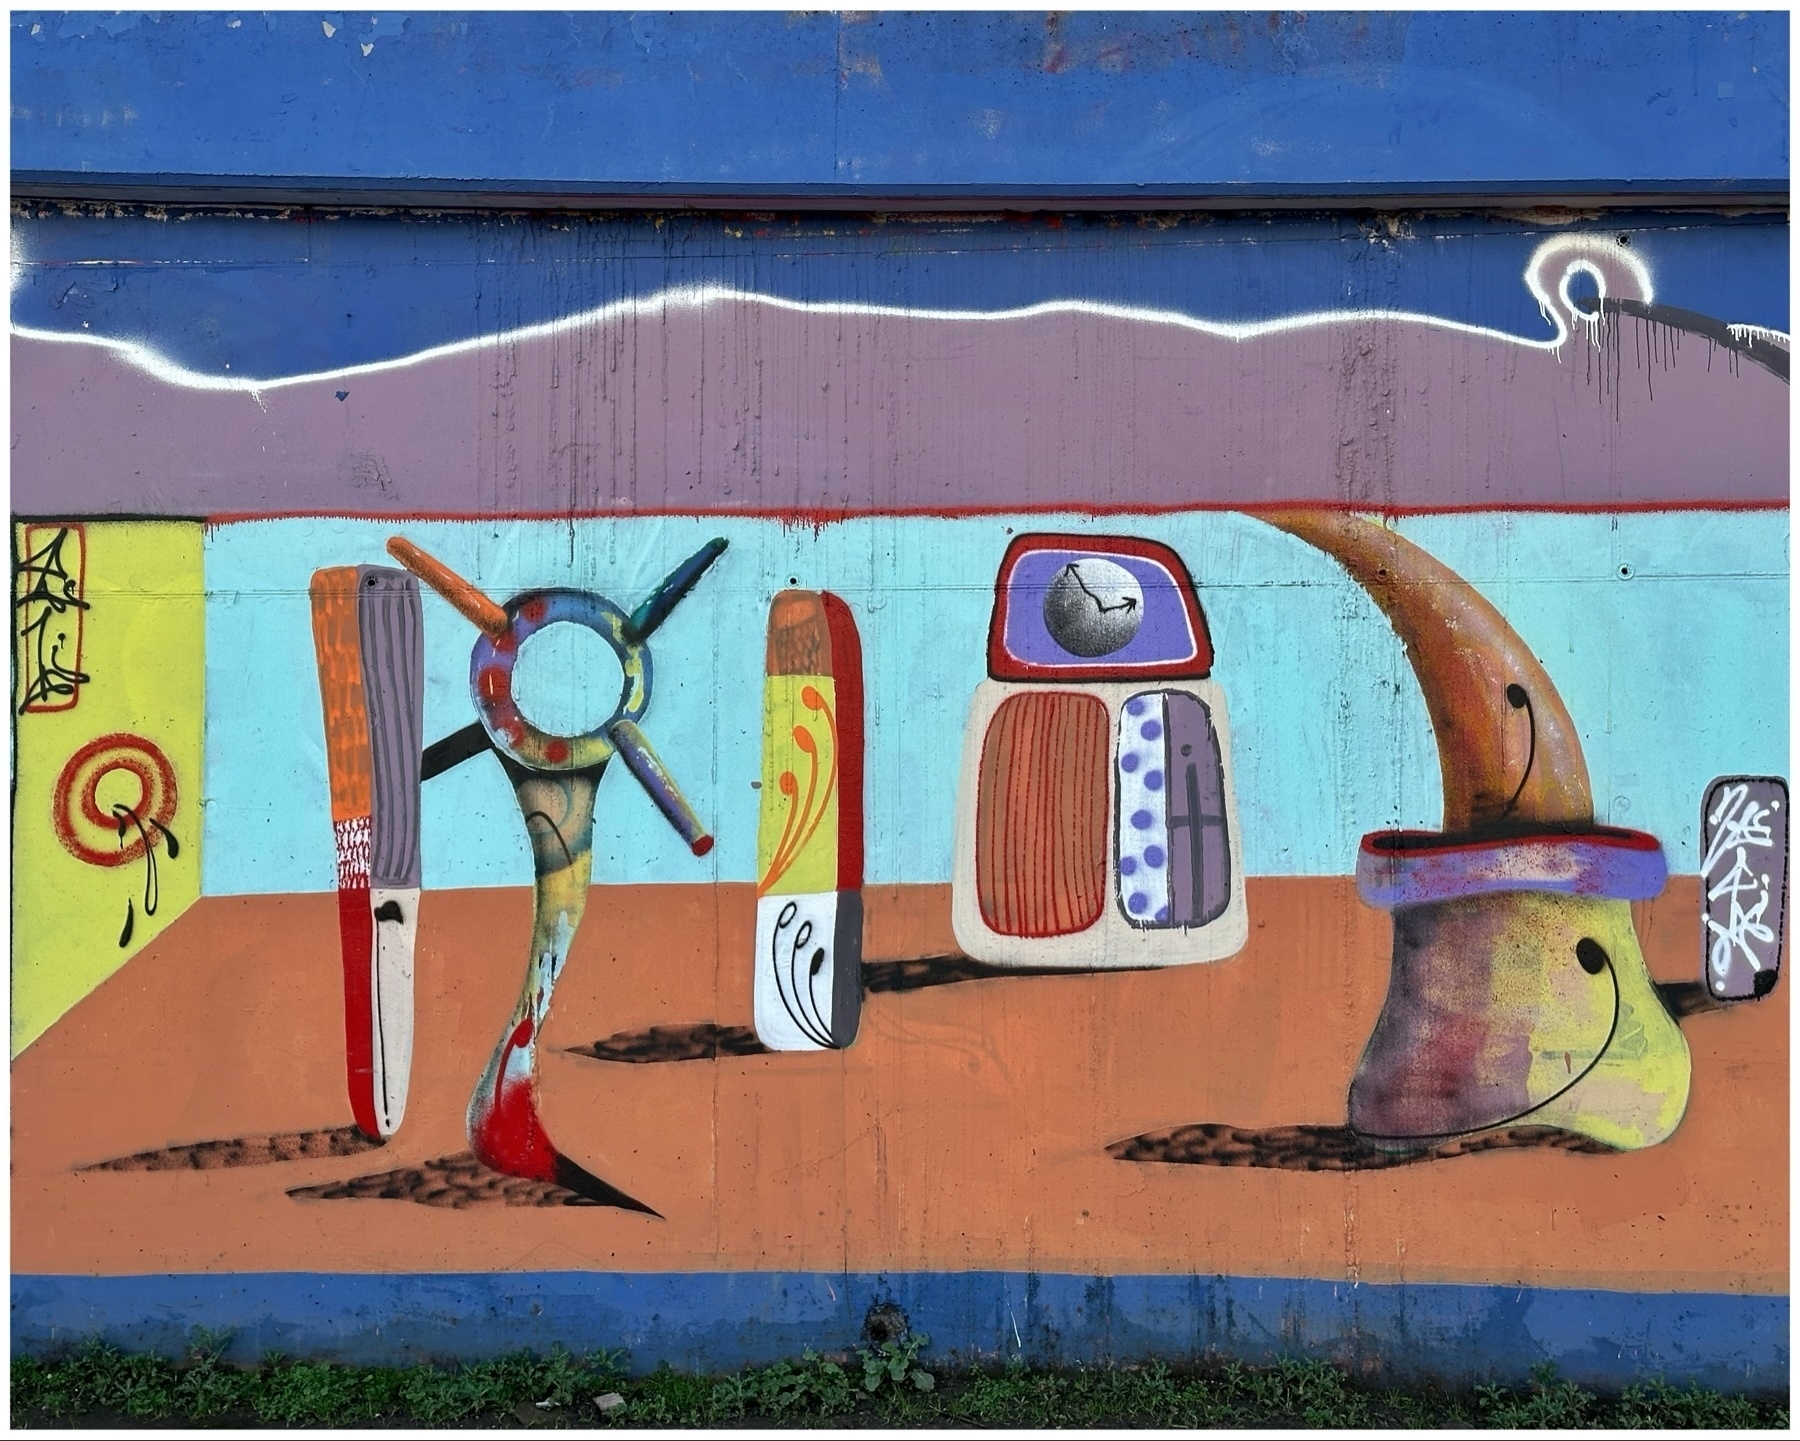 A colorful graffiti mural featuring abstract shapes and forms resembling whimsical figures and objects on an urban wall.